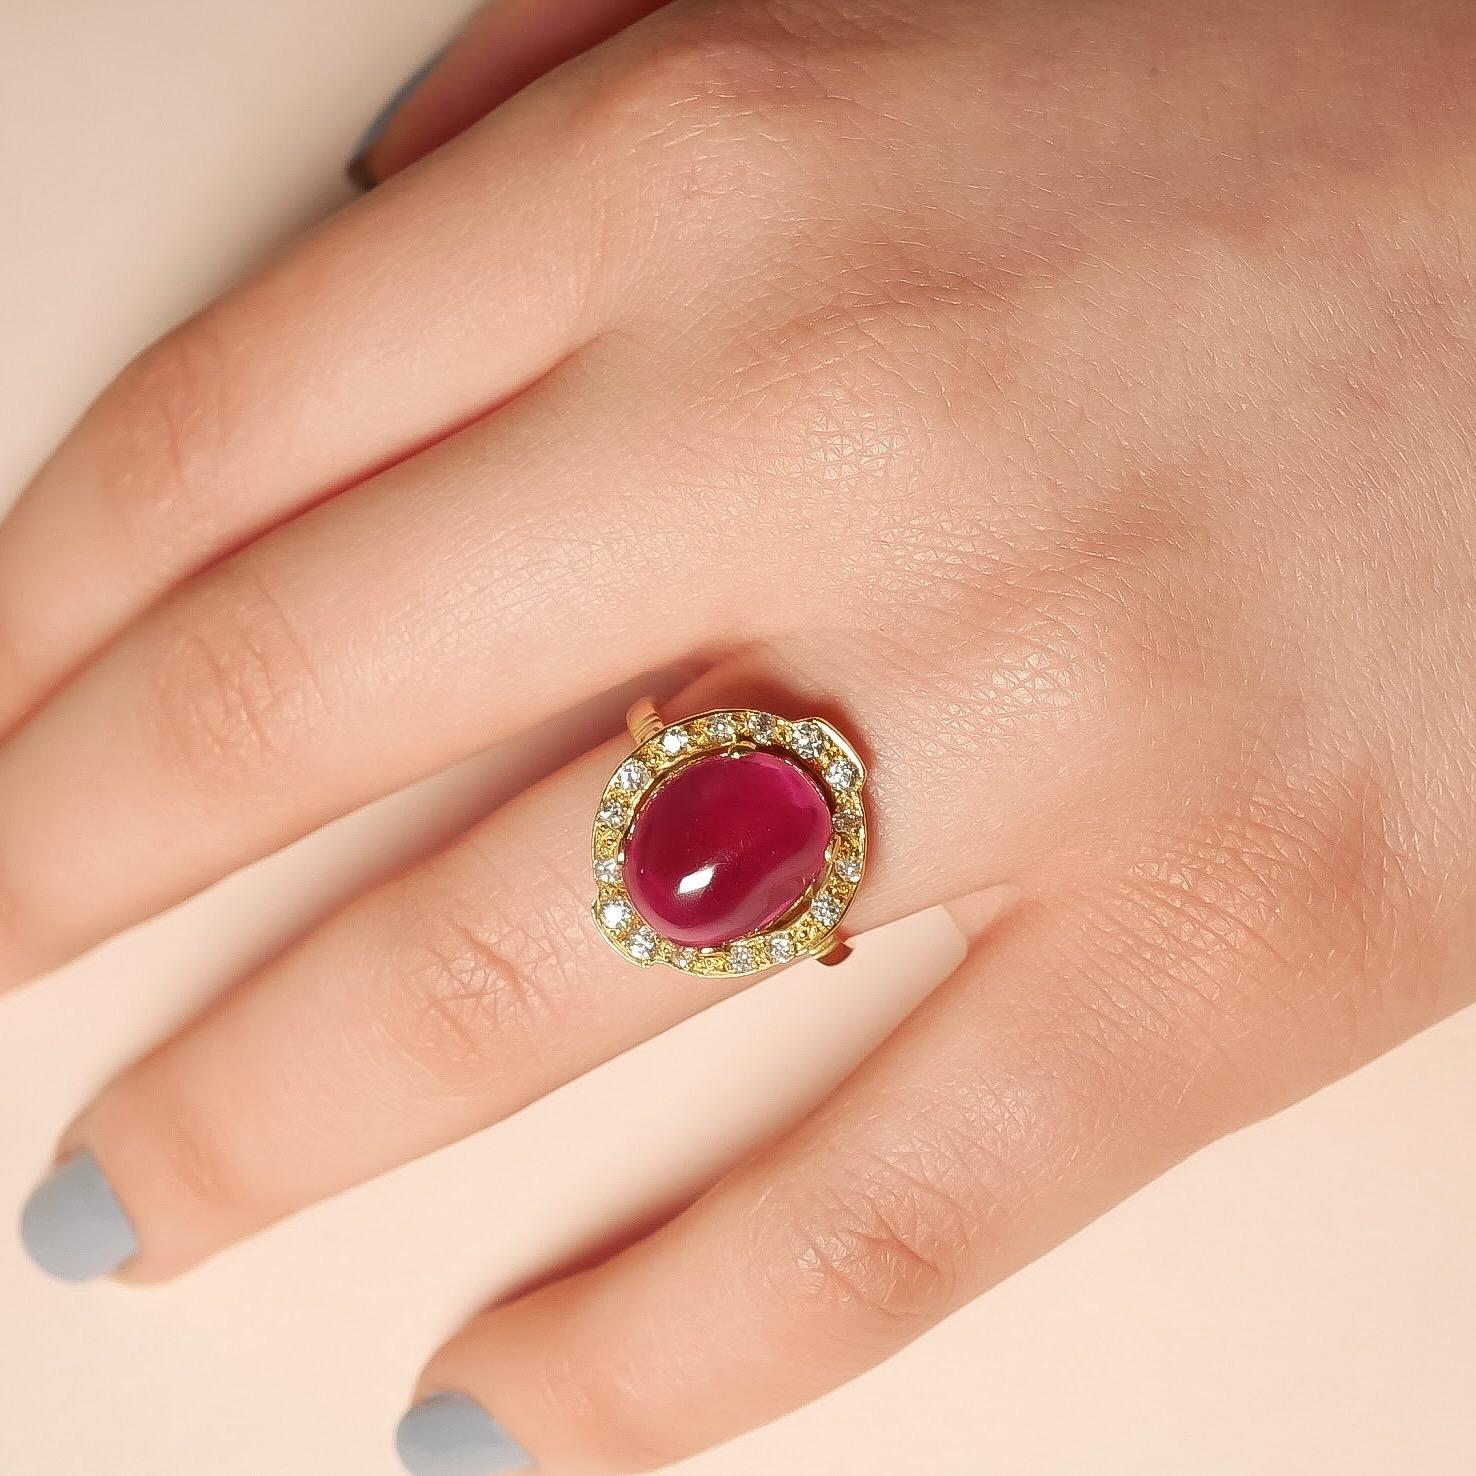 The centre stone in this one-of-a-kind yellow gold ring is a sublime pinkish red ruby cabochon, specially selected from the Haruni vault. Full of passion and spirit, the ruby is surrounded by a glittering white diamond halo, arranged octagonally